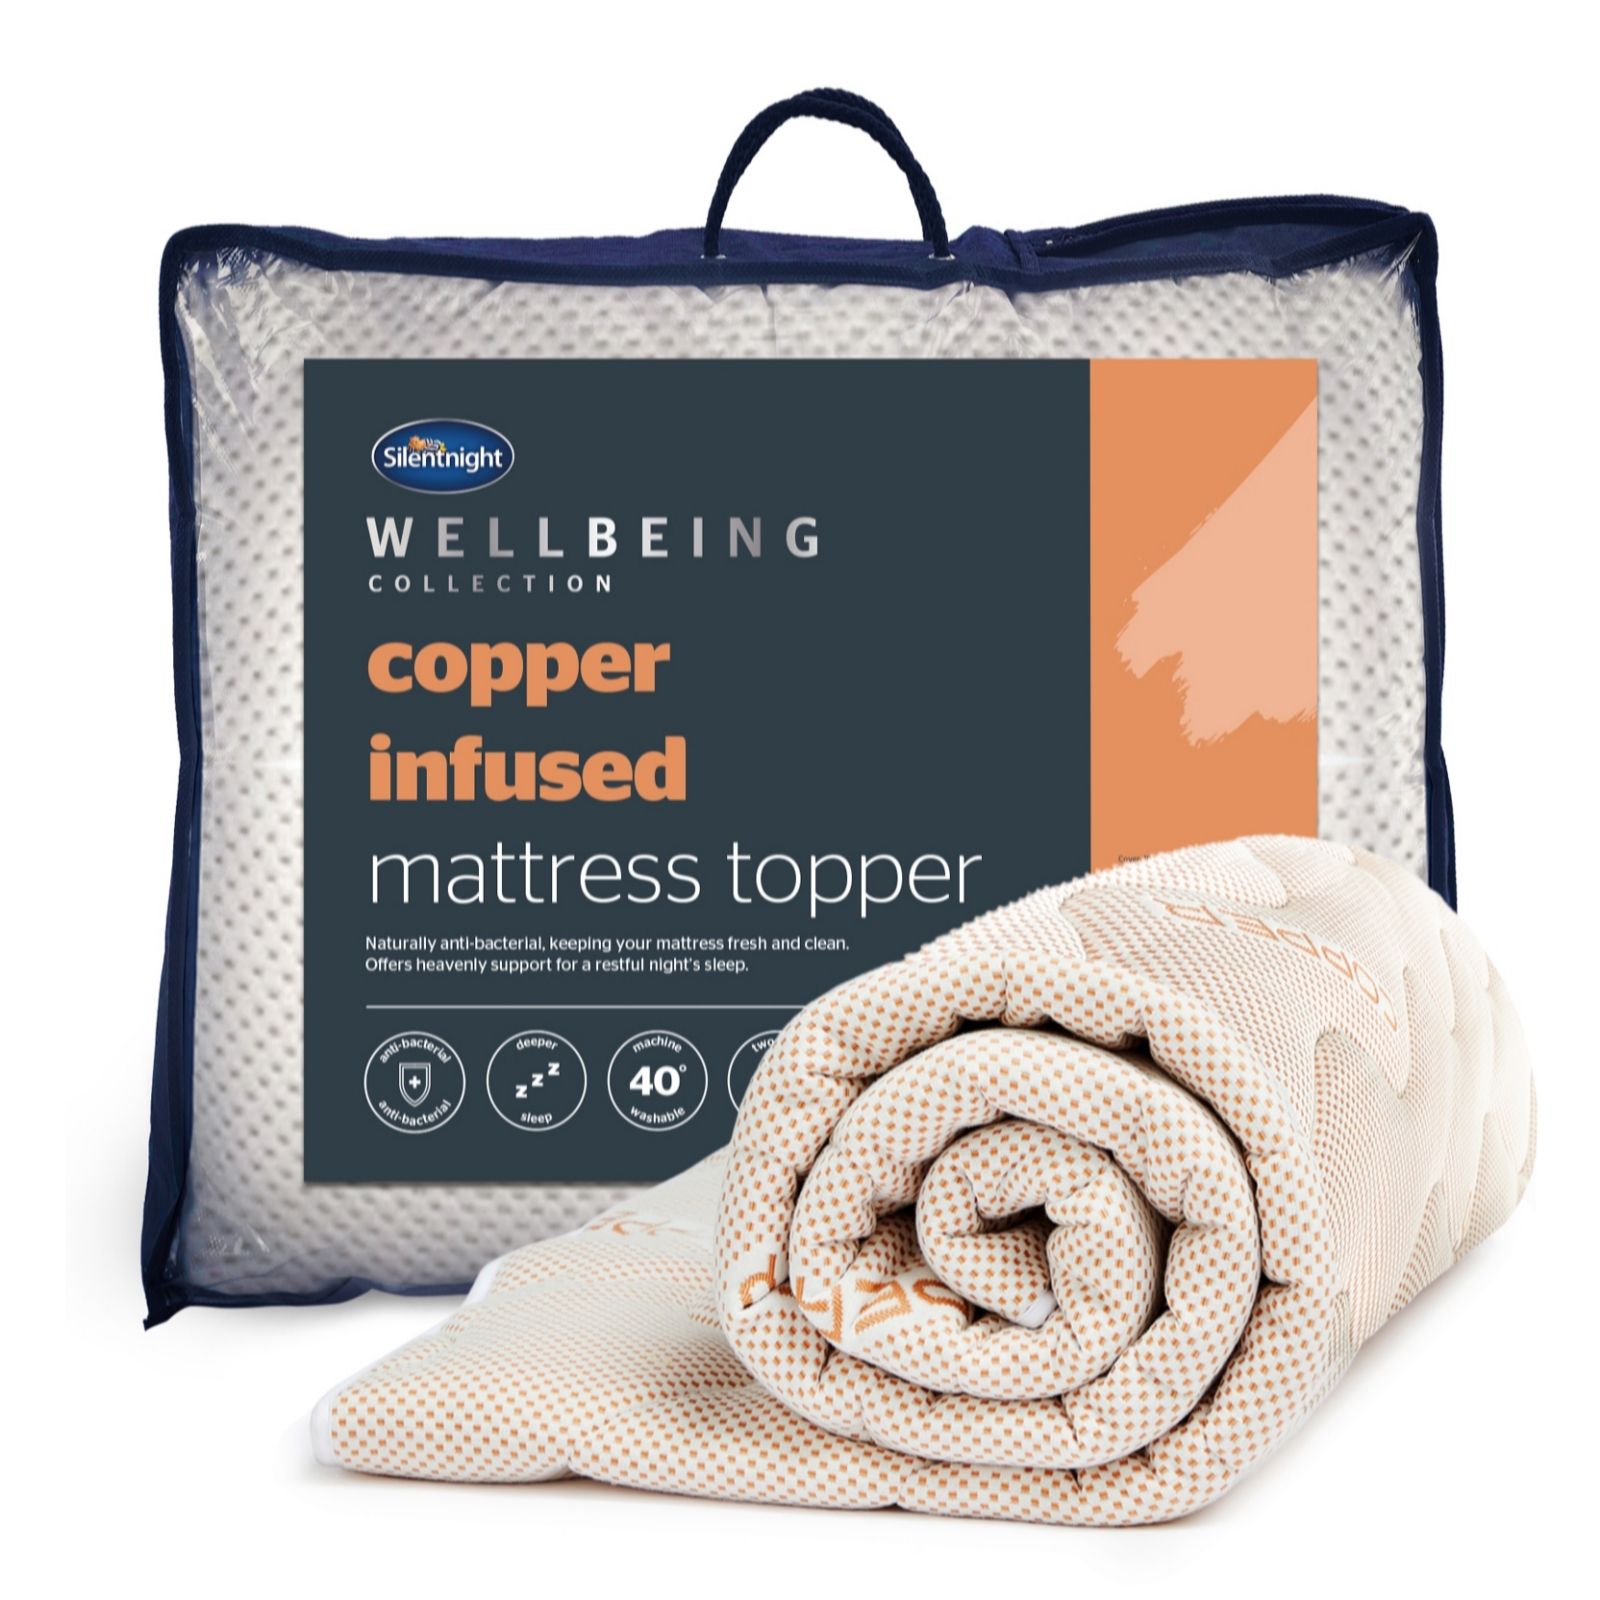 Silentnight Wellbeing Copper Infused Mattress Topper & Reviews